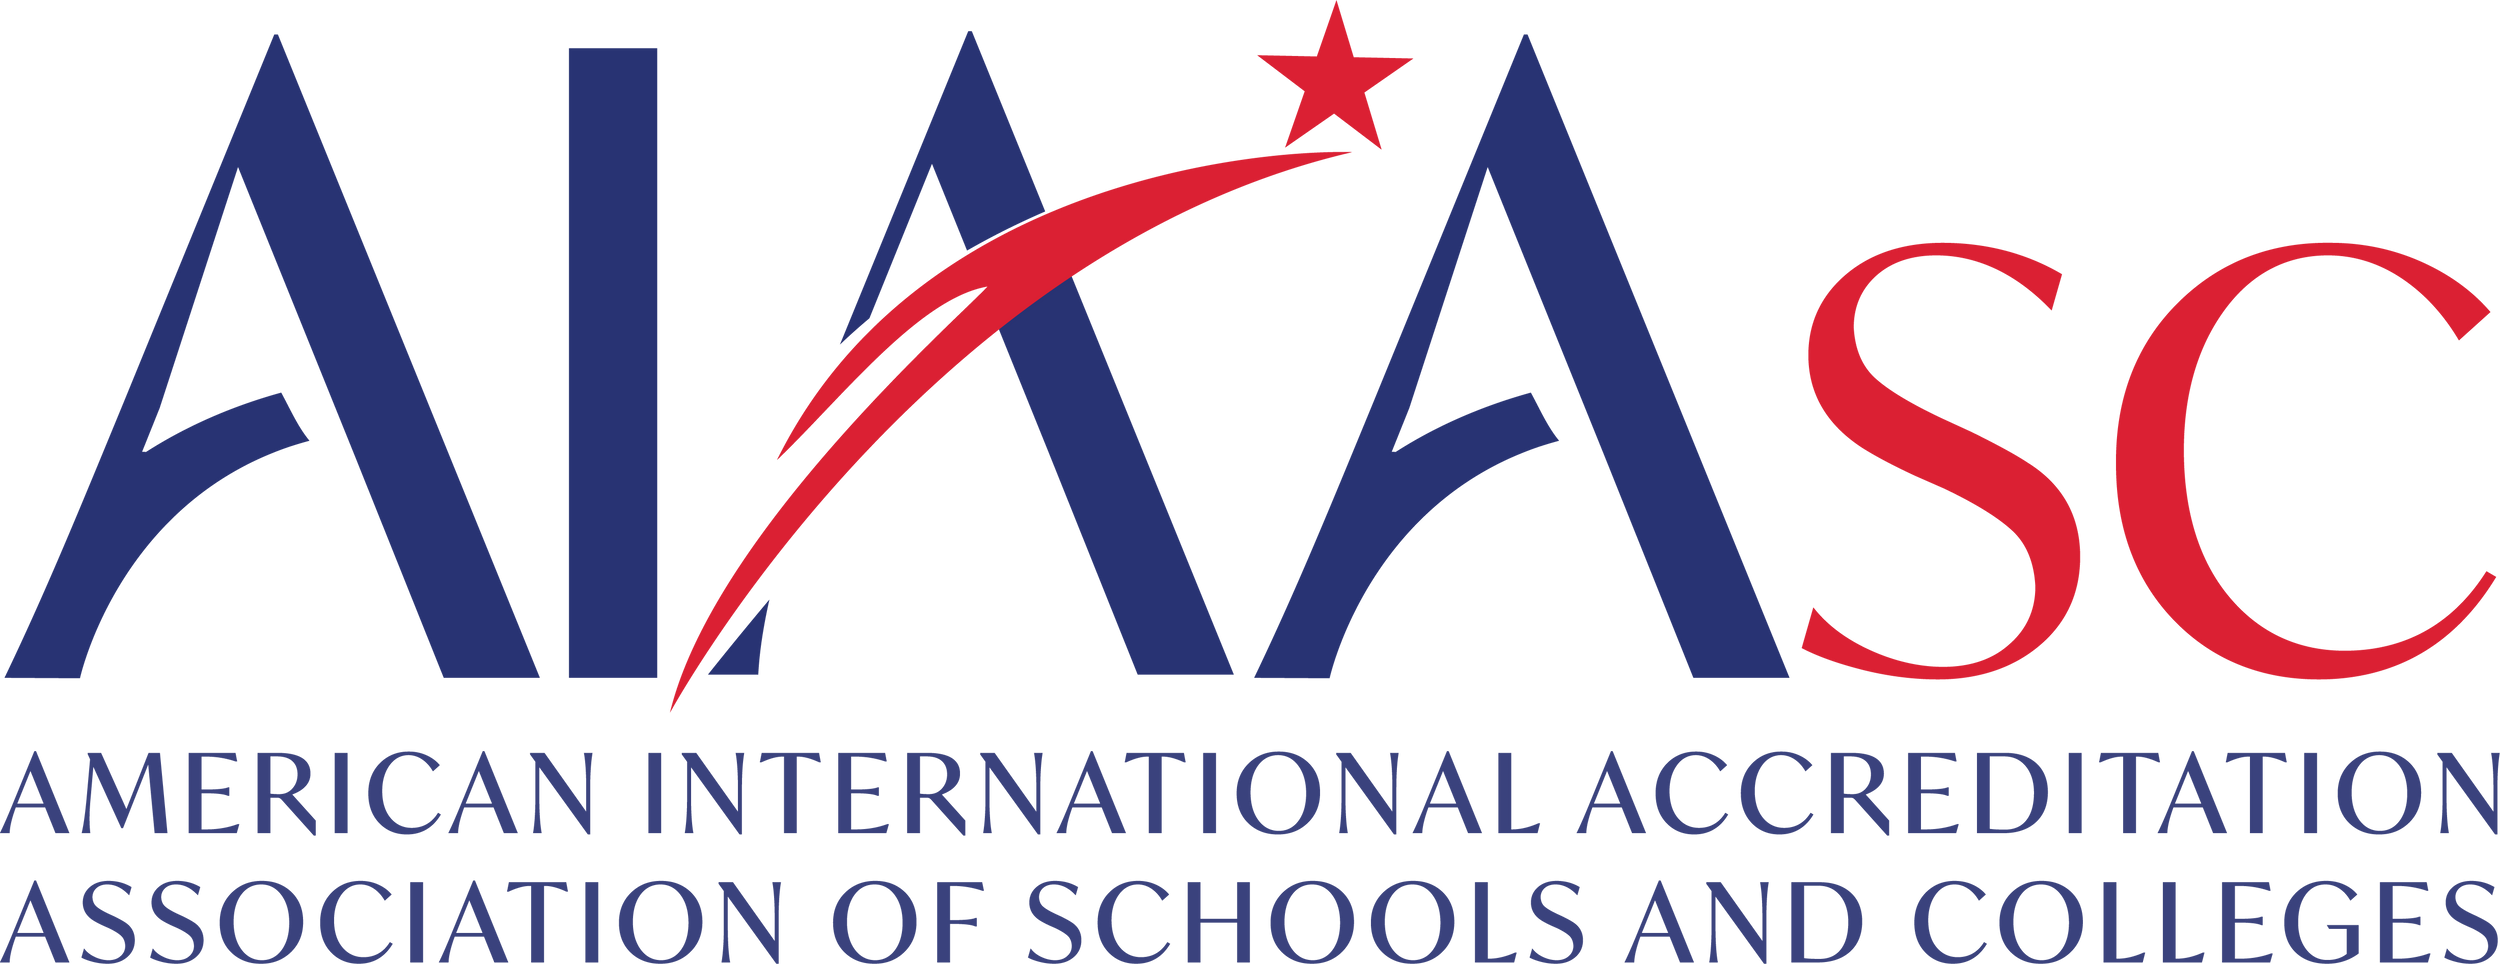 AIAA (American International Accreditation Association of Schools and Colleges)